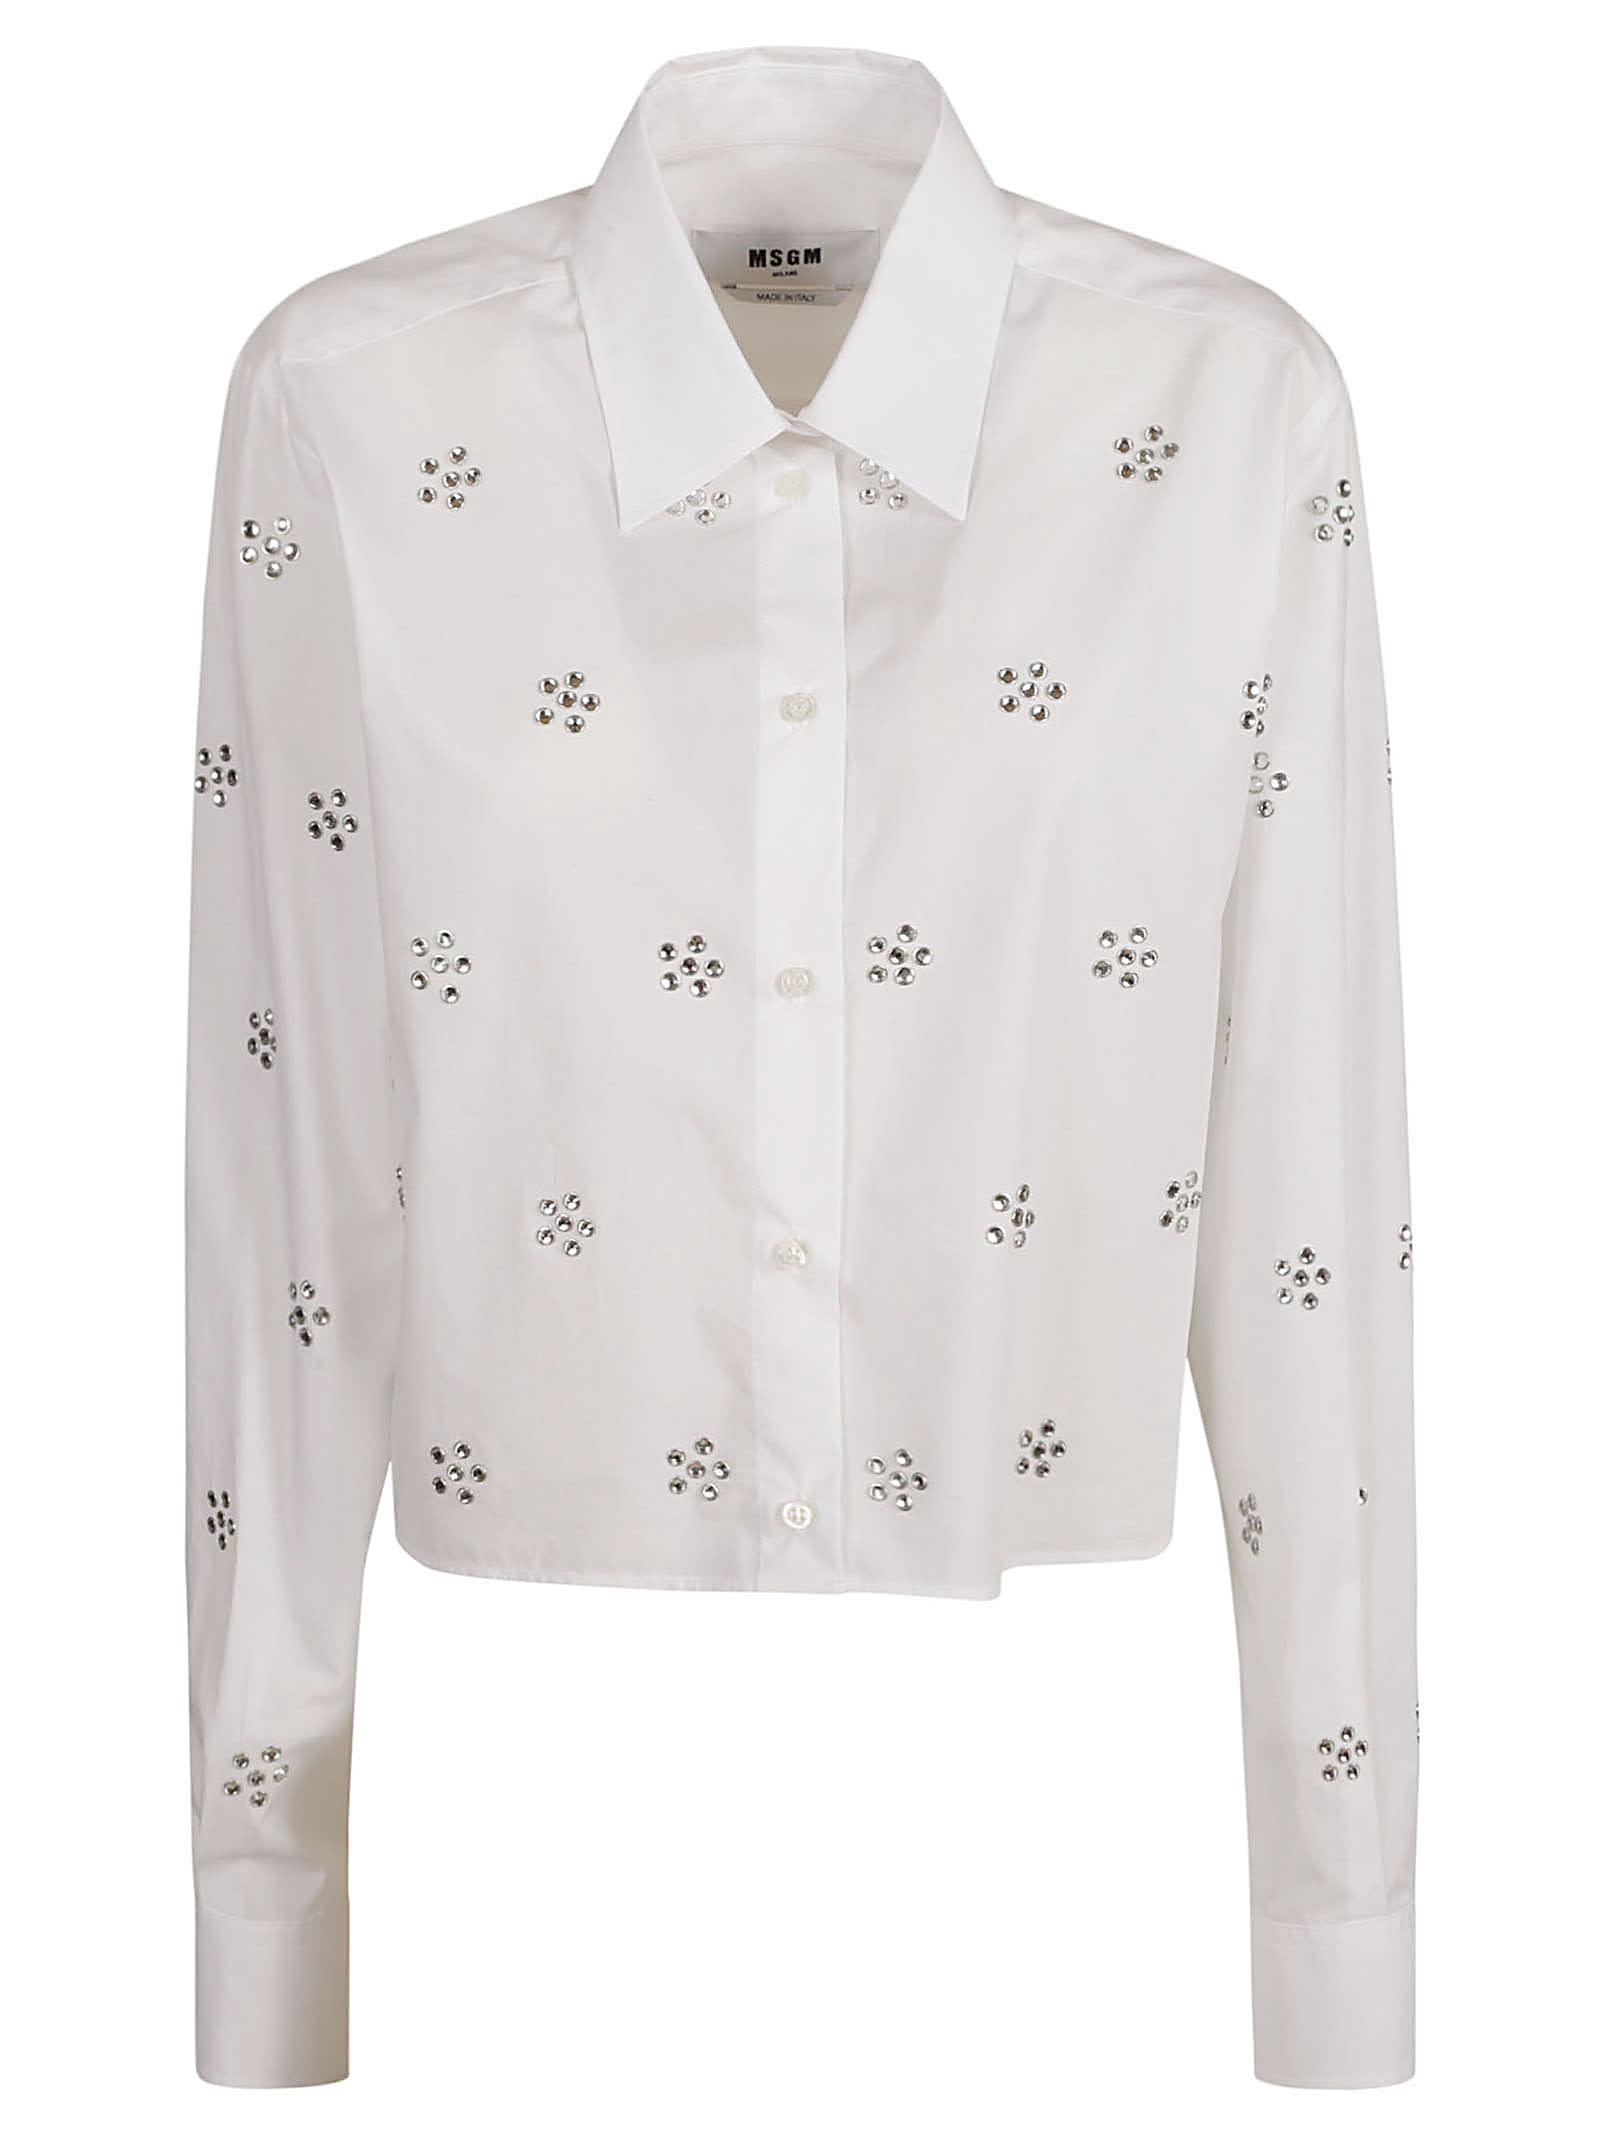 Msgm Cropped Embellished Shirt In White